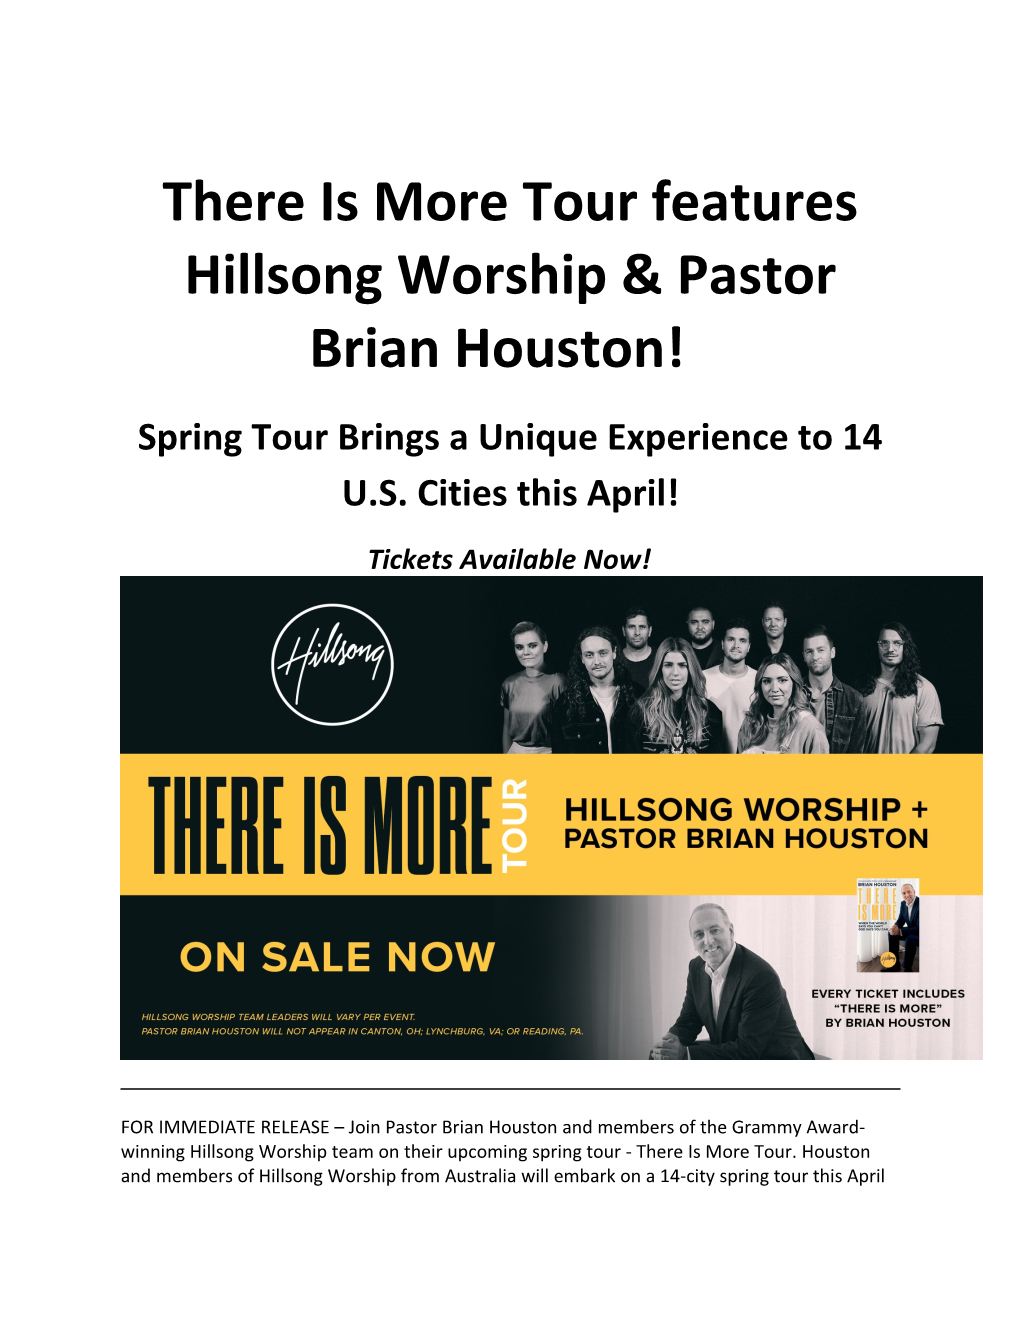 There Is More Tour Features Hillsong Worship Pastor Brian Houston!